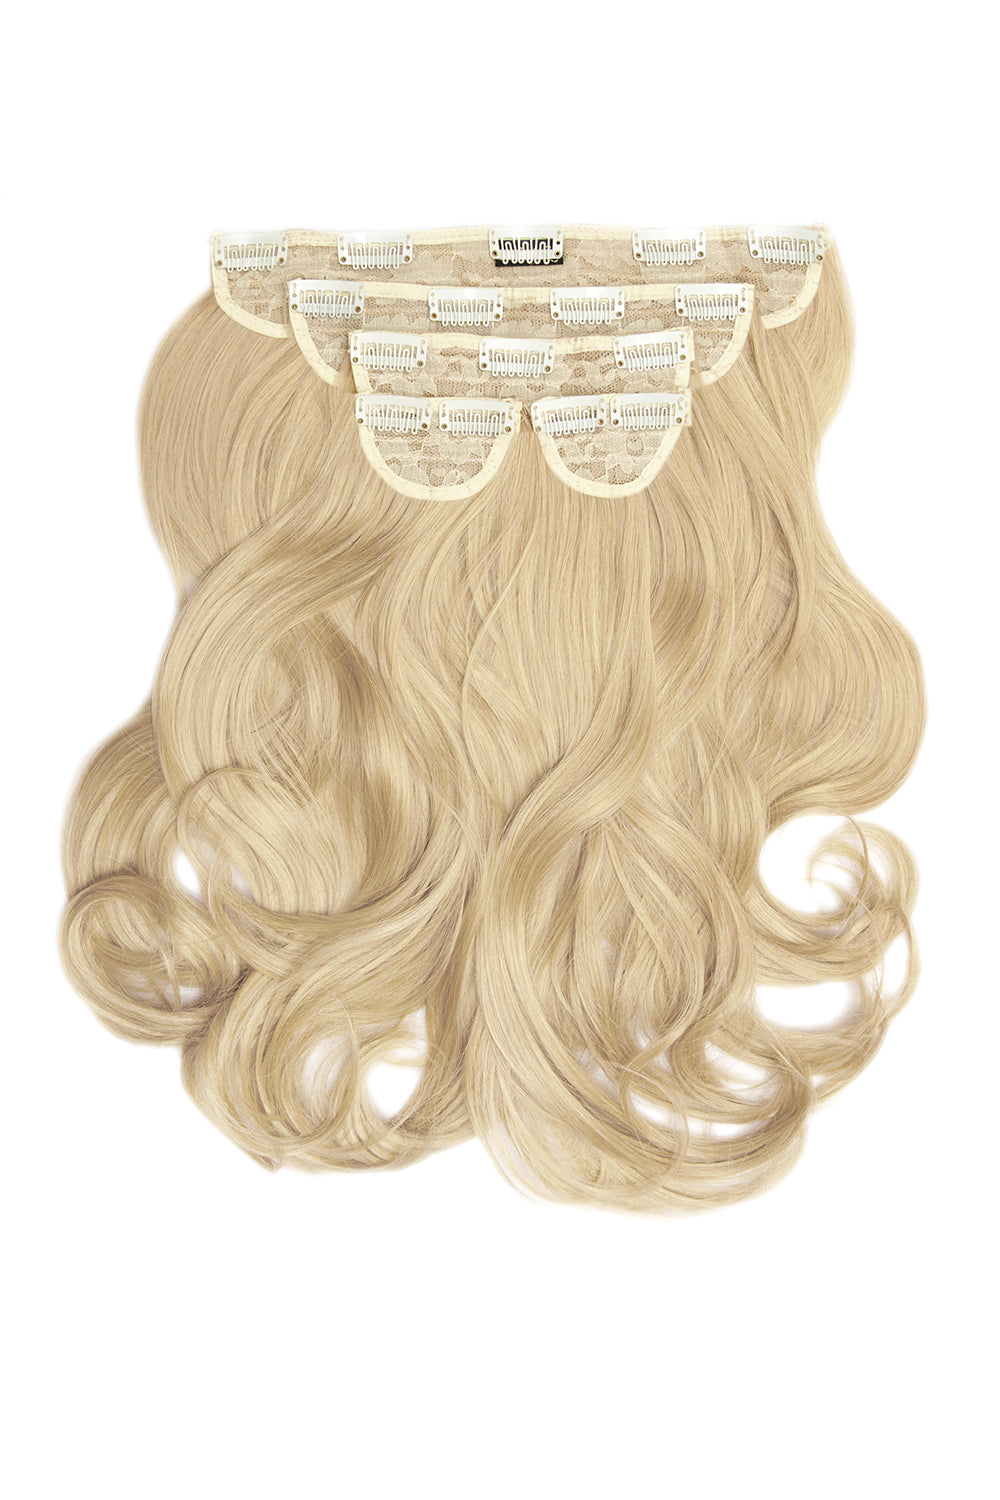 Super Thick 16" 5 Piece Blow Dry Wavy Clip In Hair Extensions - California Blonde